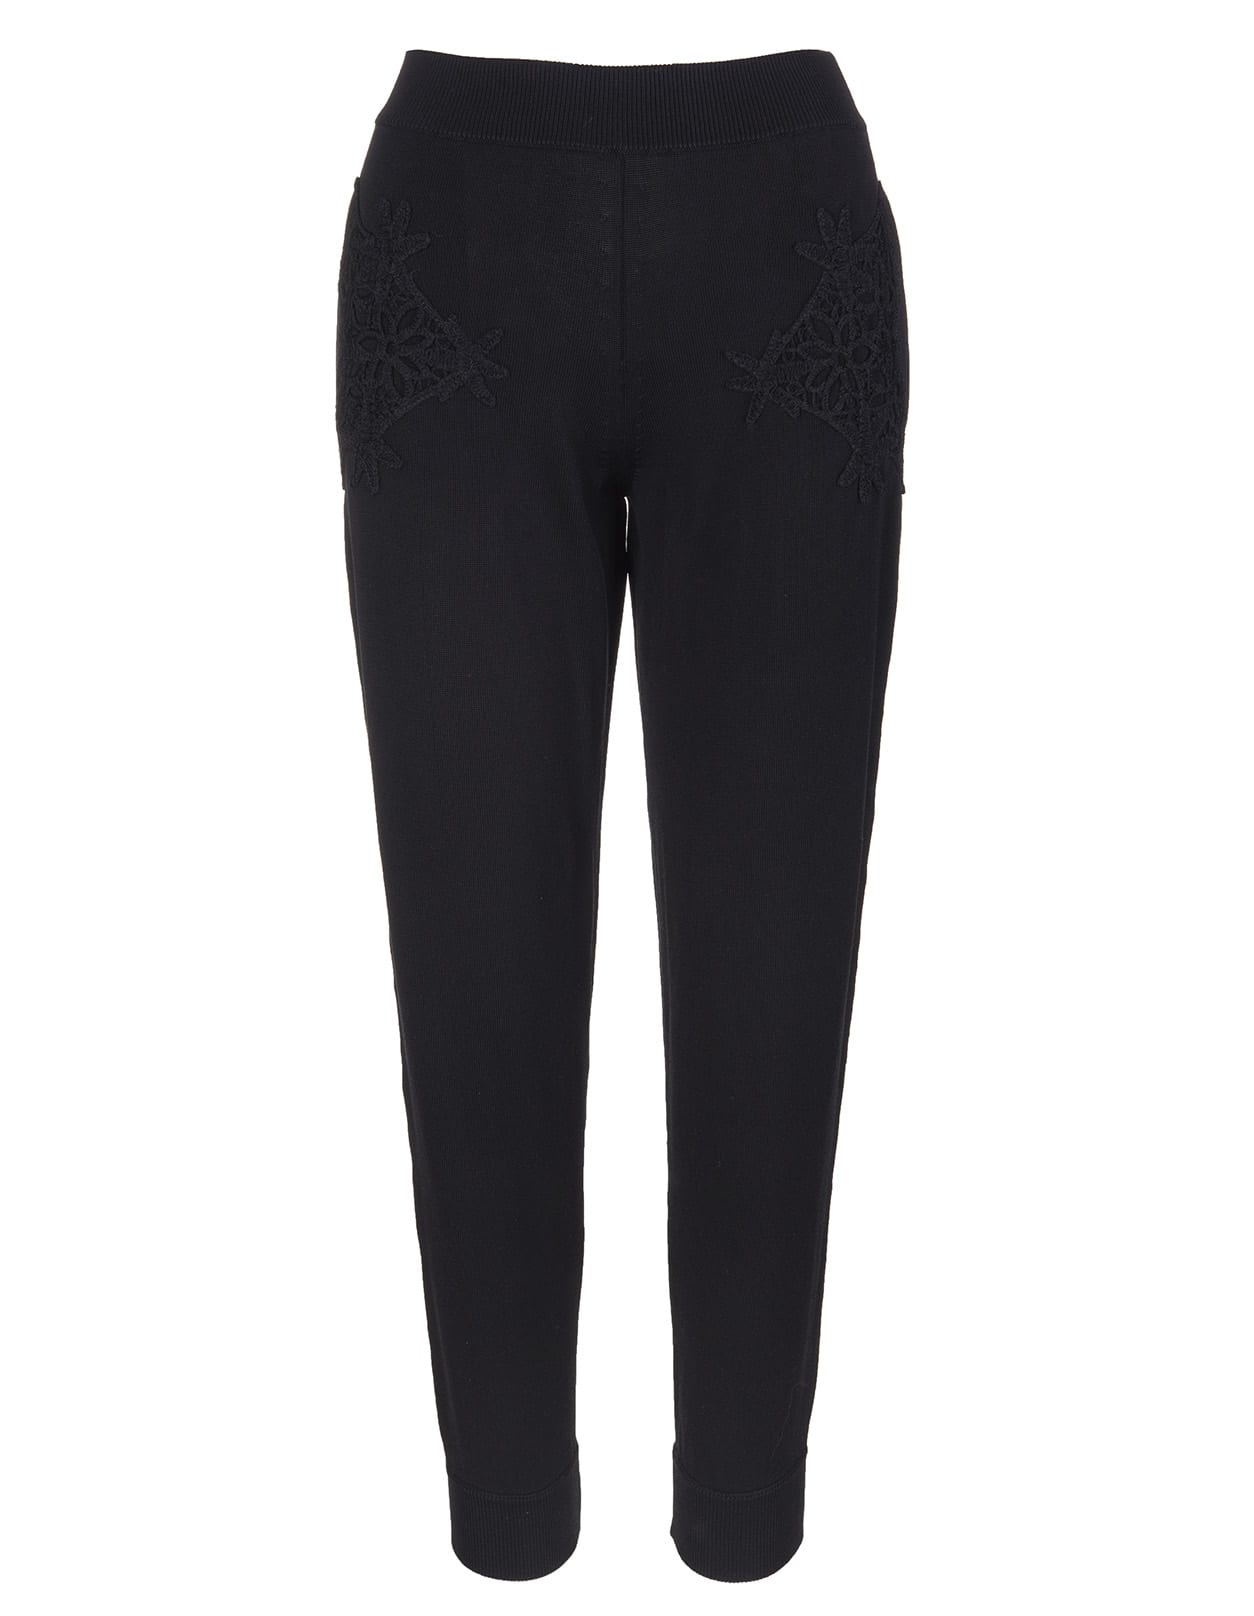 Stella McCartney Black Knitted Pant With Embroidery